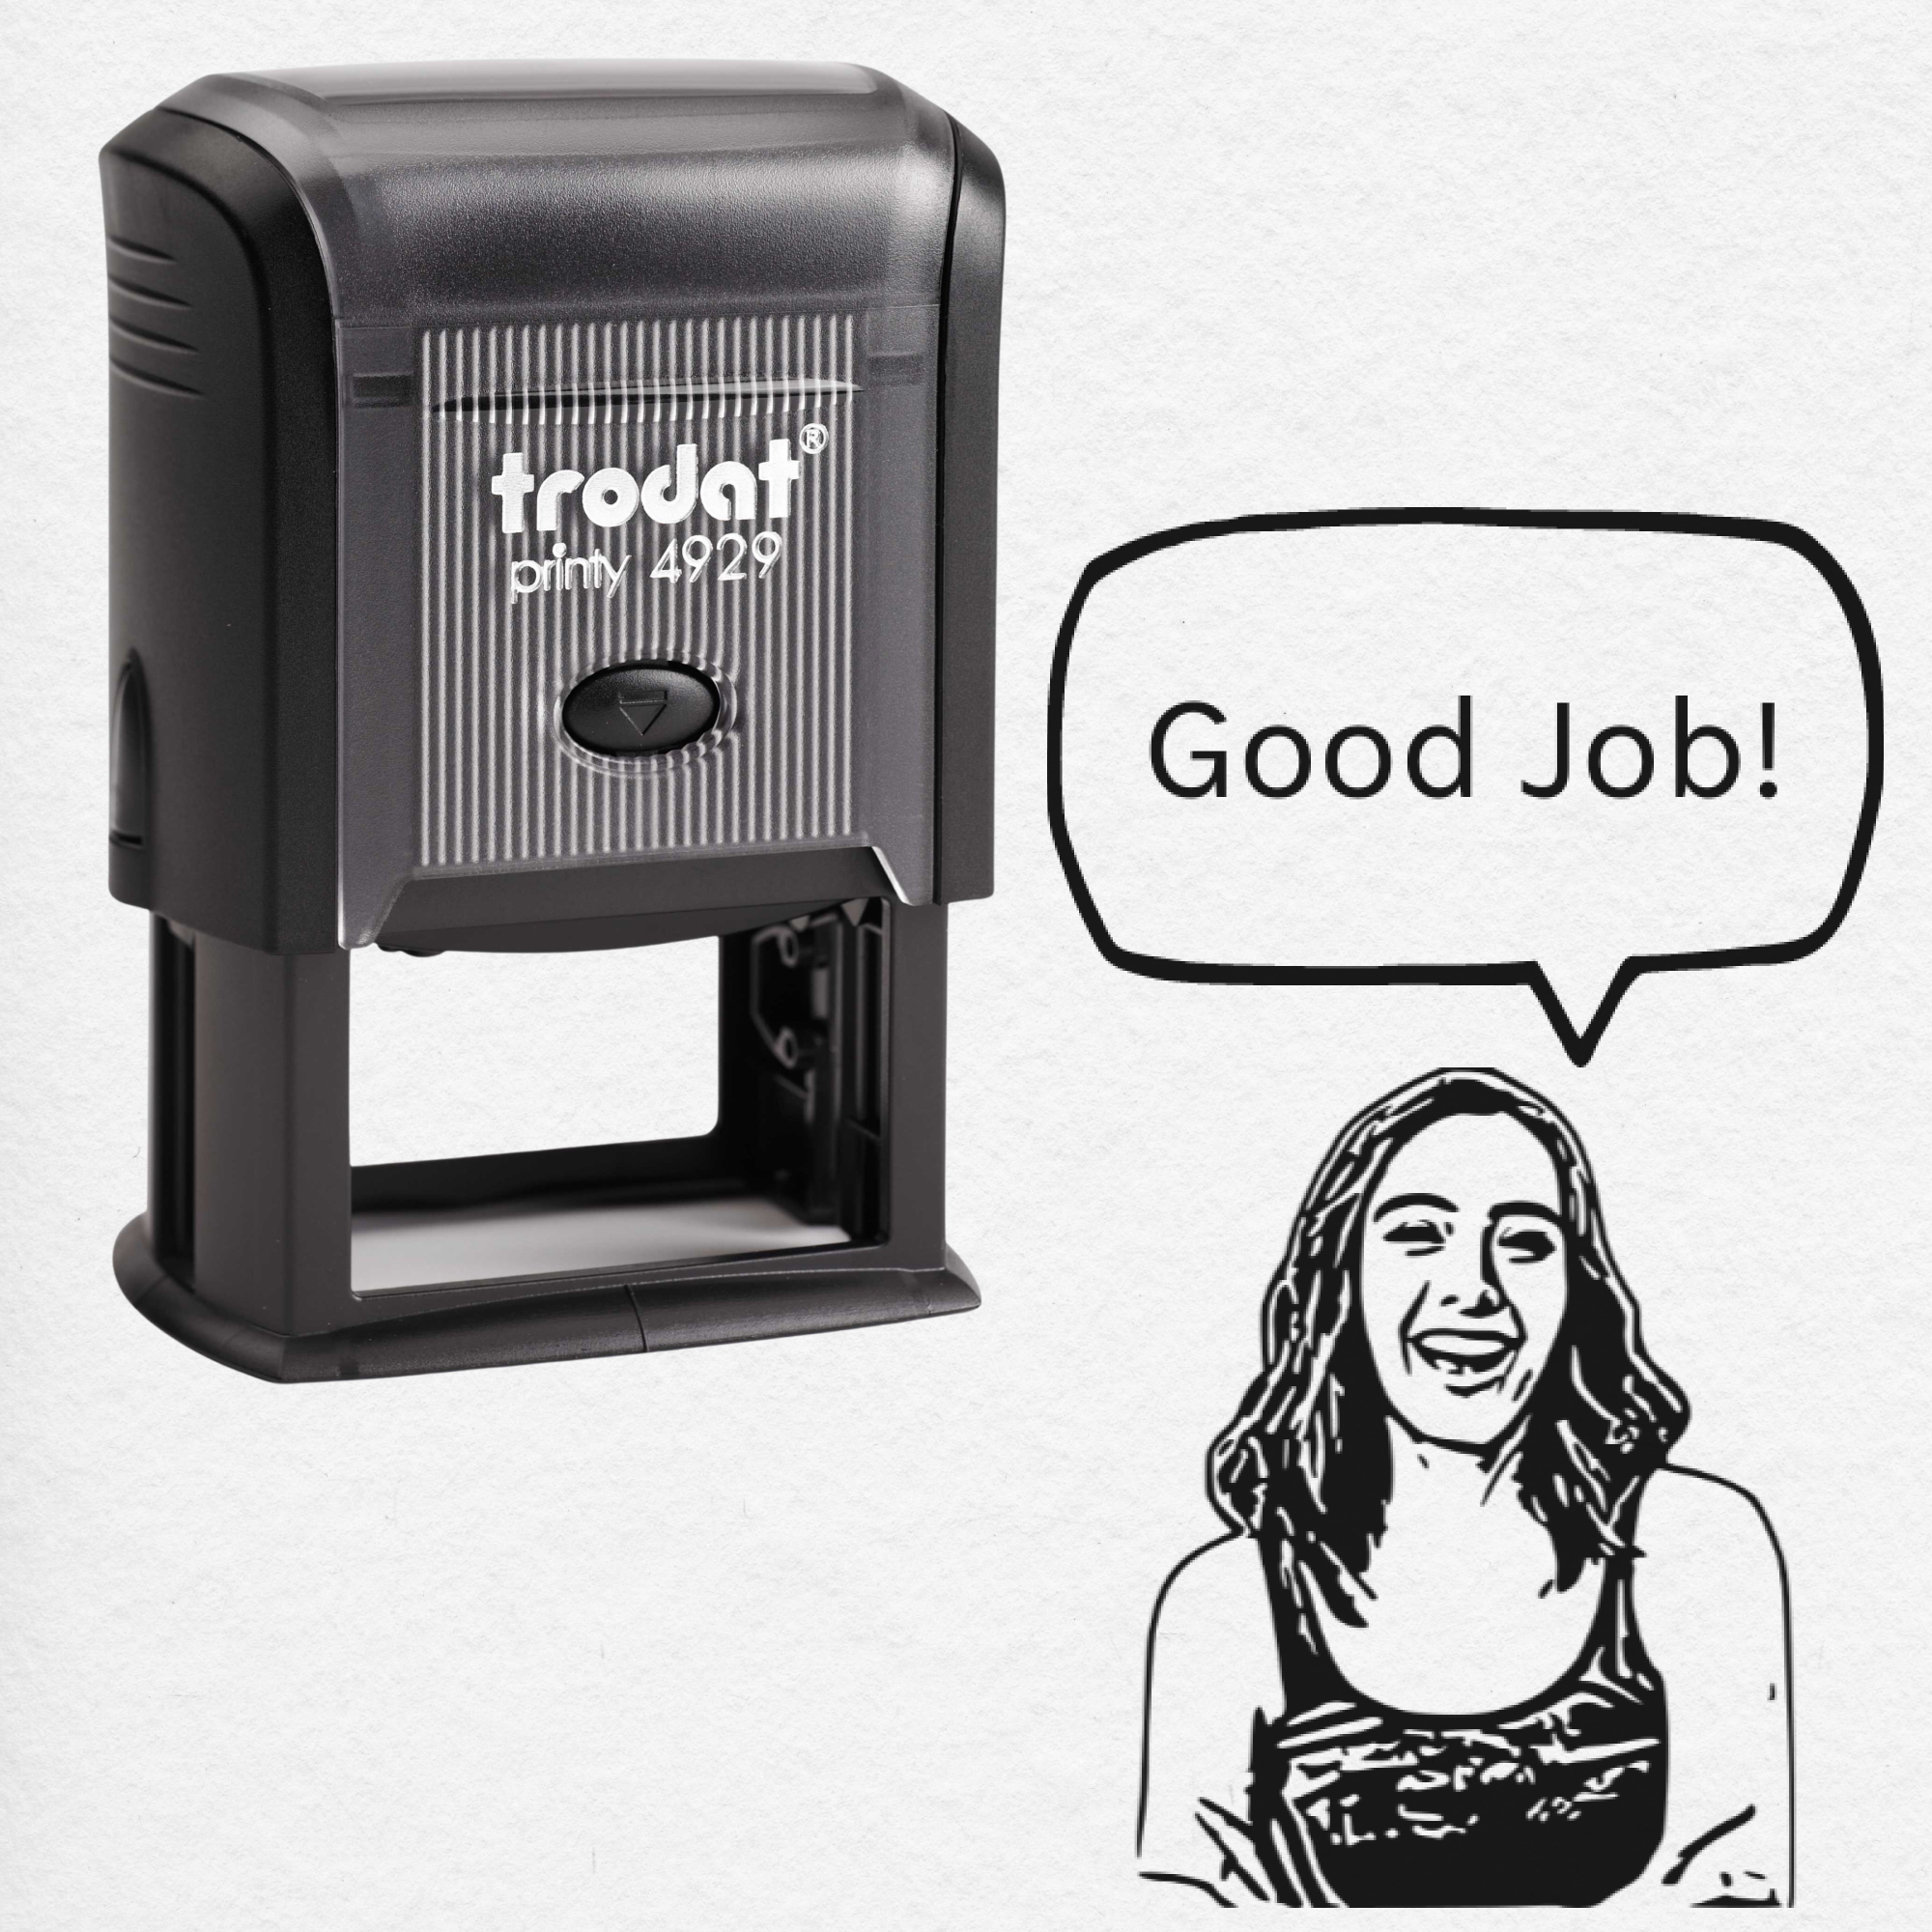 Images of Self-Inking Face Stamp (1)